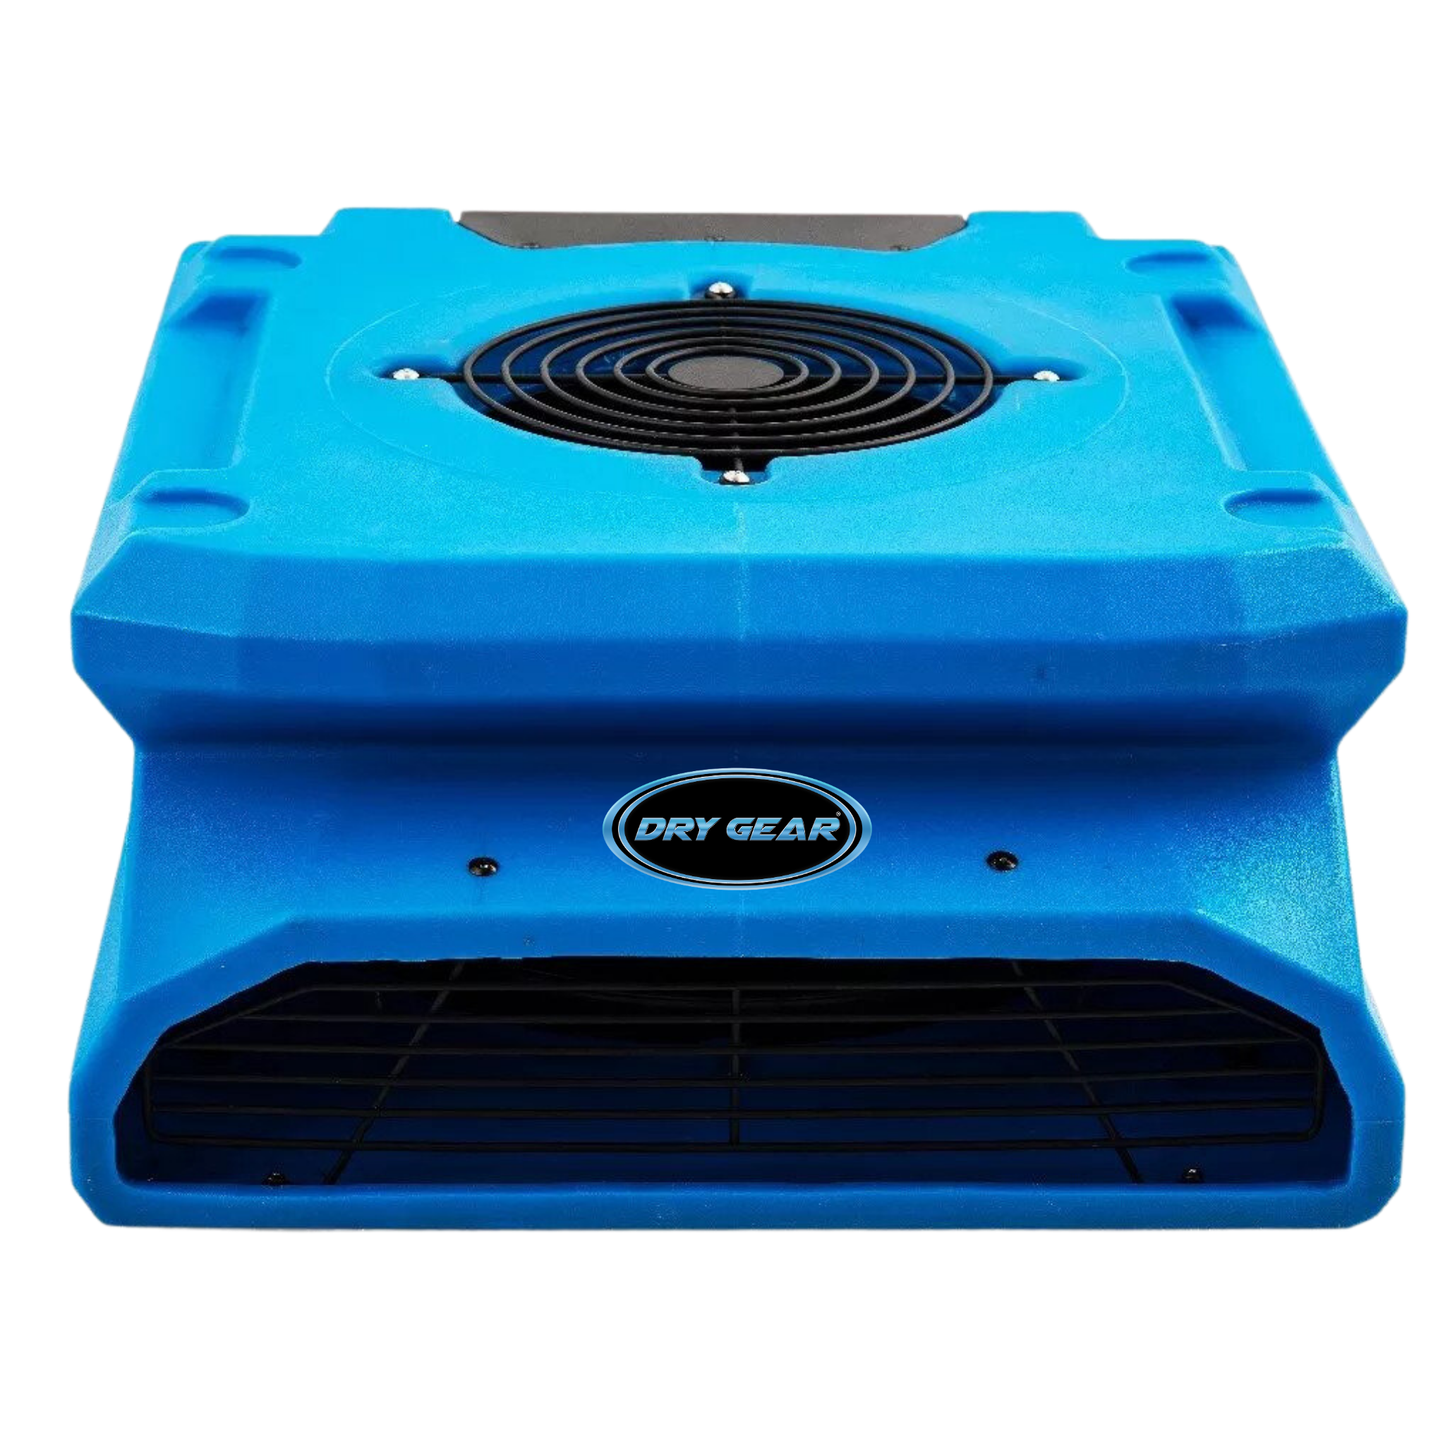 Dry Gear DG1100 CFM Low Profile Air Mover with GFCI Outlet - Powerhouse Performance for Efficient Drying and Ventilation Misc Blue,Green